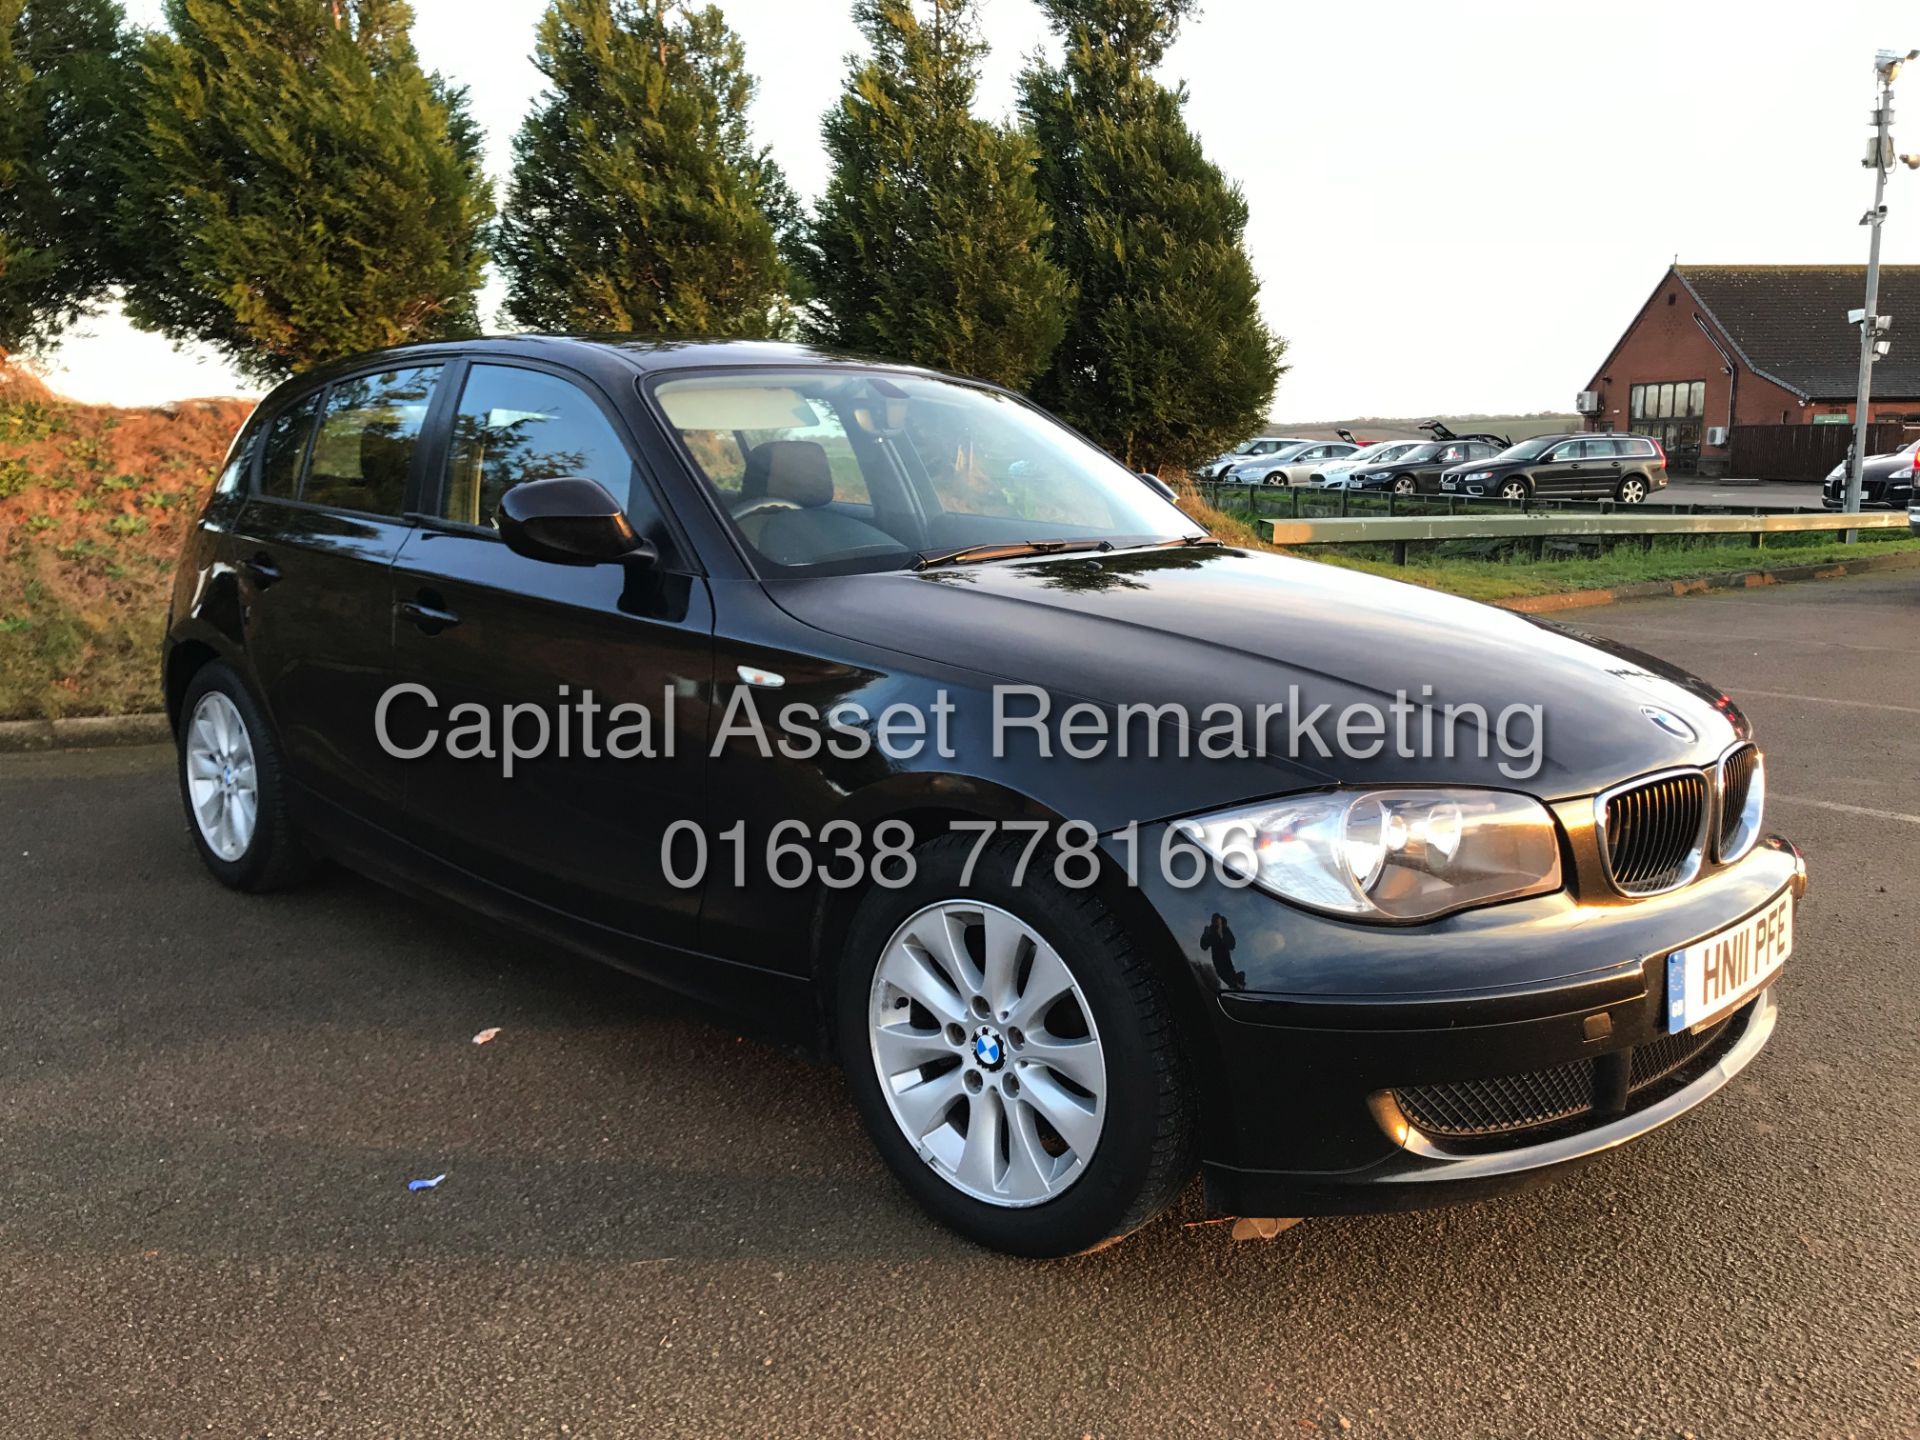 (ON SALE) BMW 118D SEIRES 5 DOOR (11 REG) 1 PREVIOUS KEEPER - AIR CON - ELEC PACK (NO VAT) - Image 3 of 16